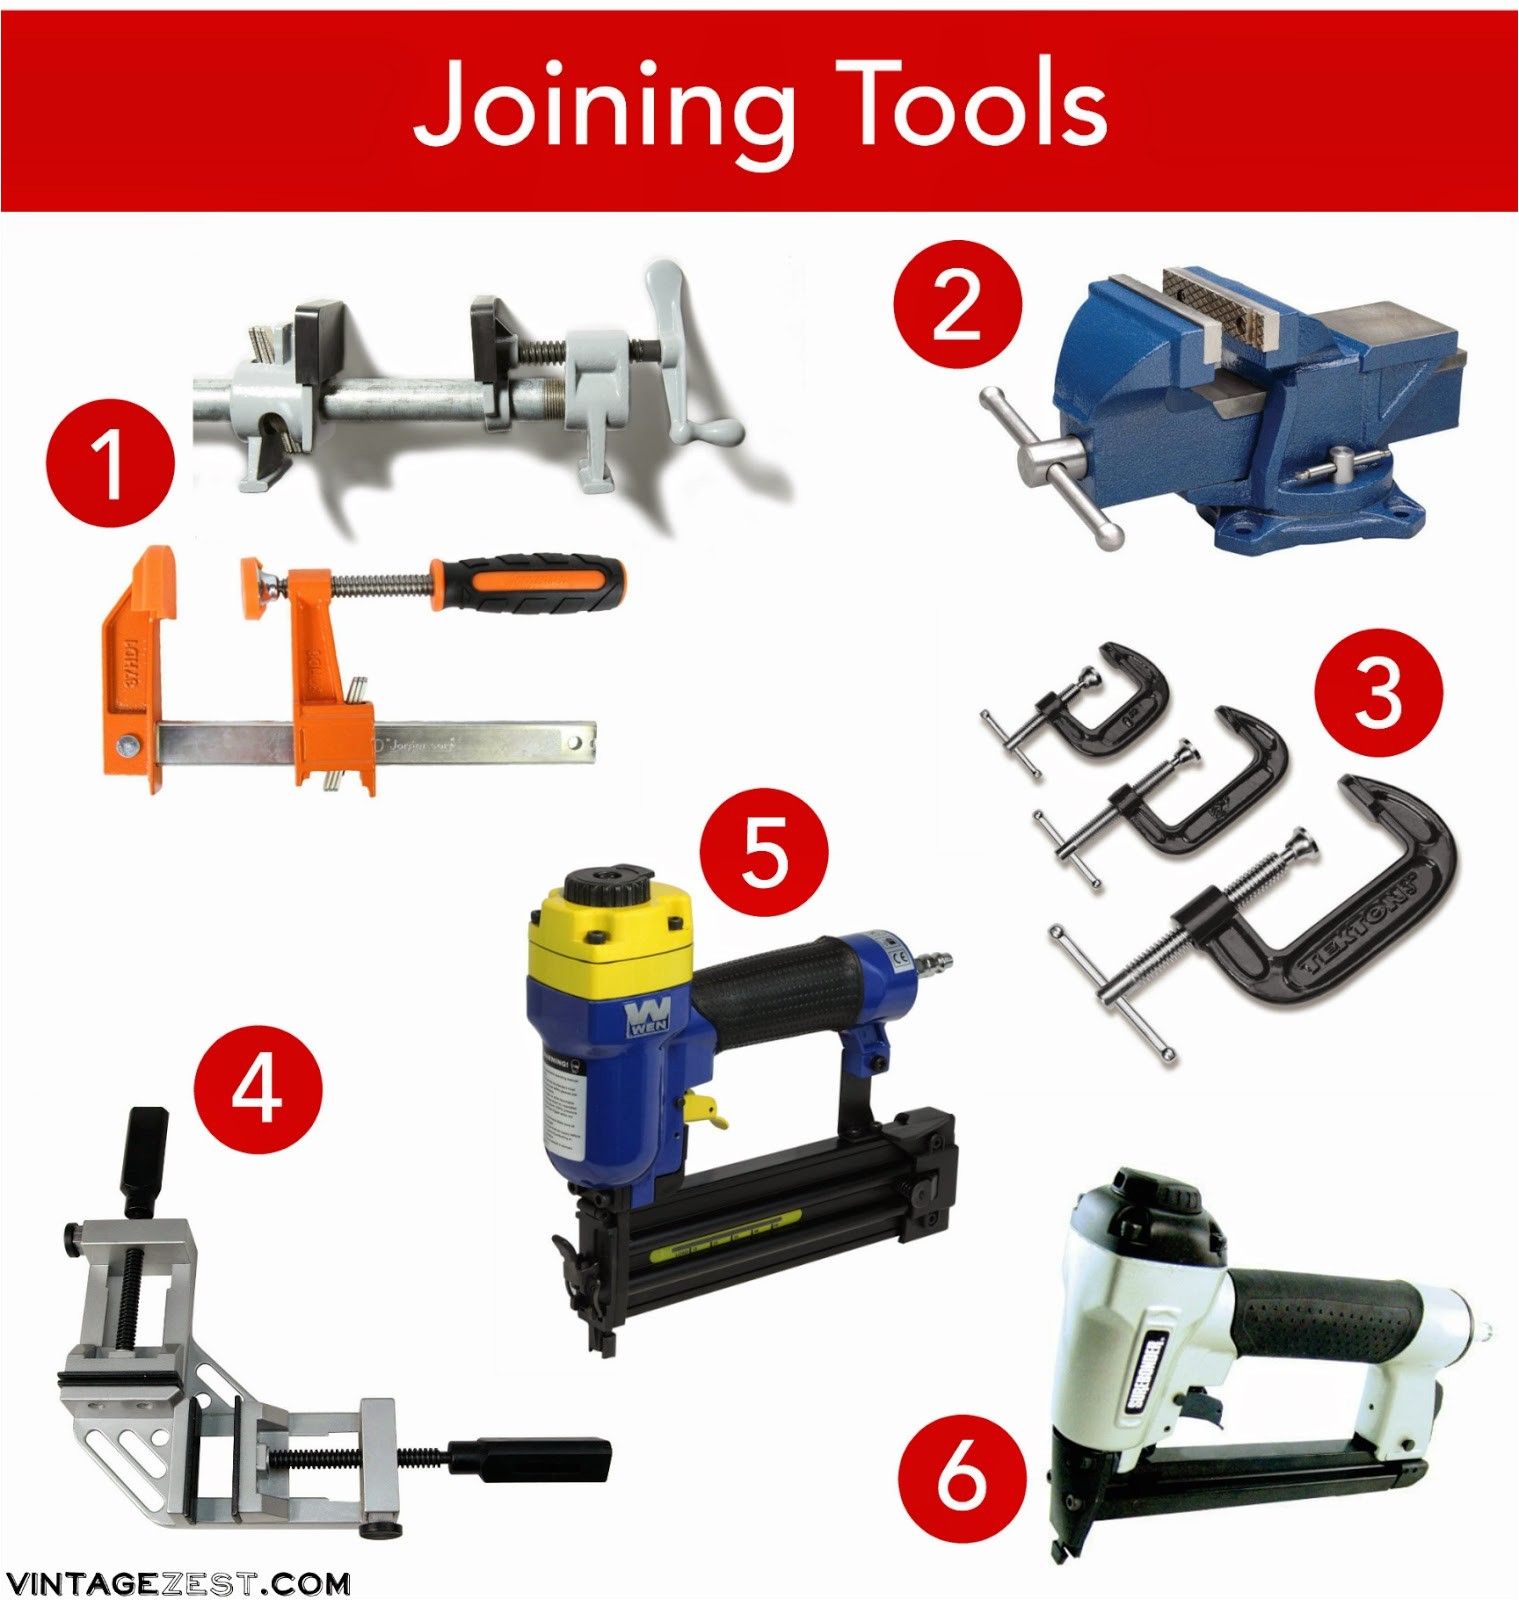 essential woodworking tools for